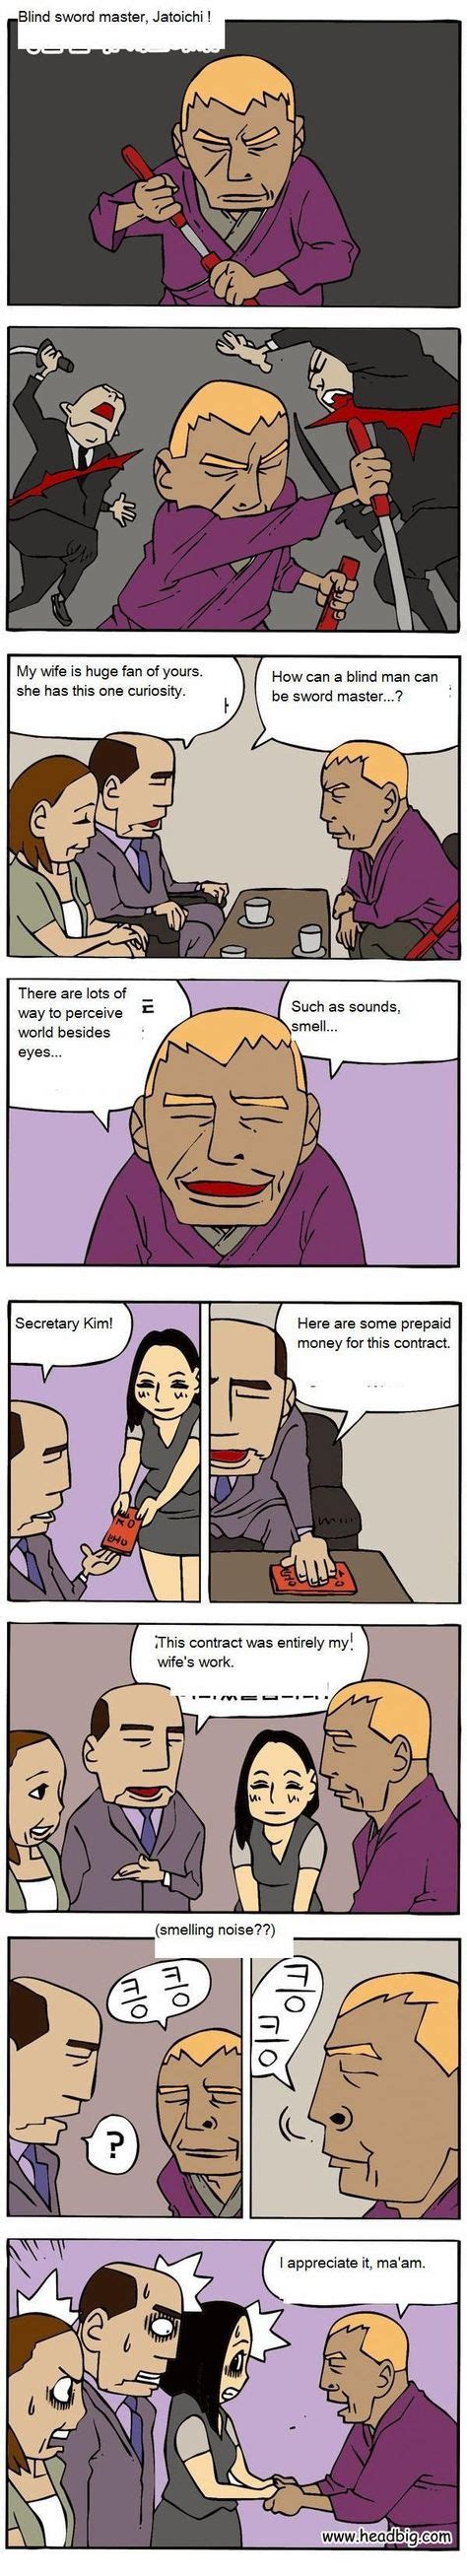 16 best korean adult funny comic images on pinterest ha ha funny stuff and funny things